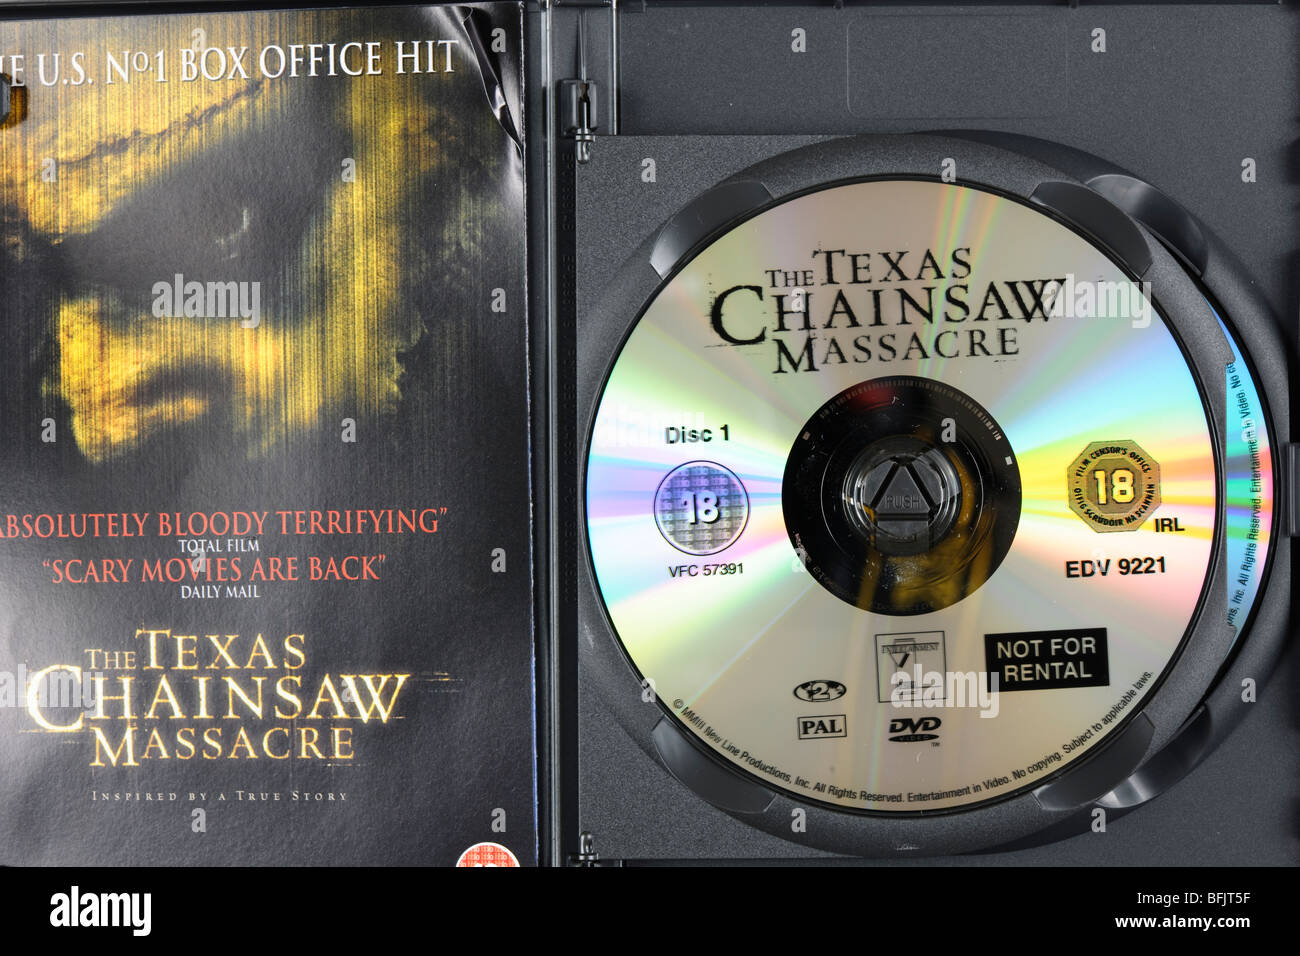 THE TEXAS CHAIN SAW MASSACRE DVD DISC BOX COVER. DISC AND BOX INTERIOR  Stock Photo - Alamy